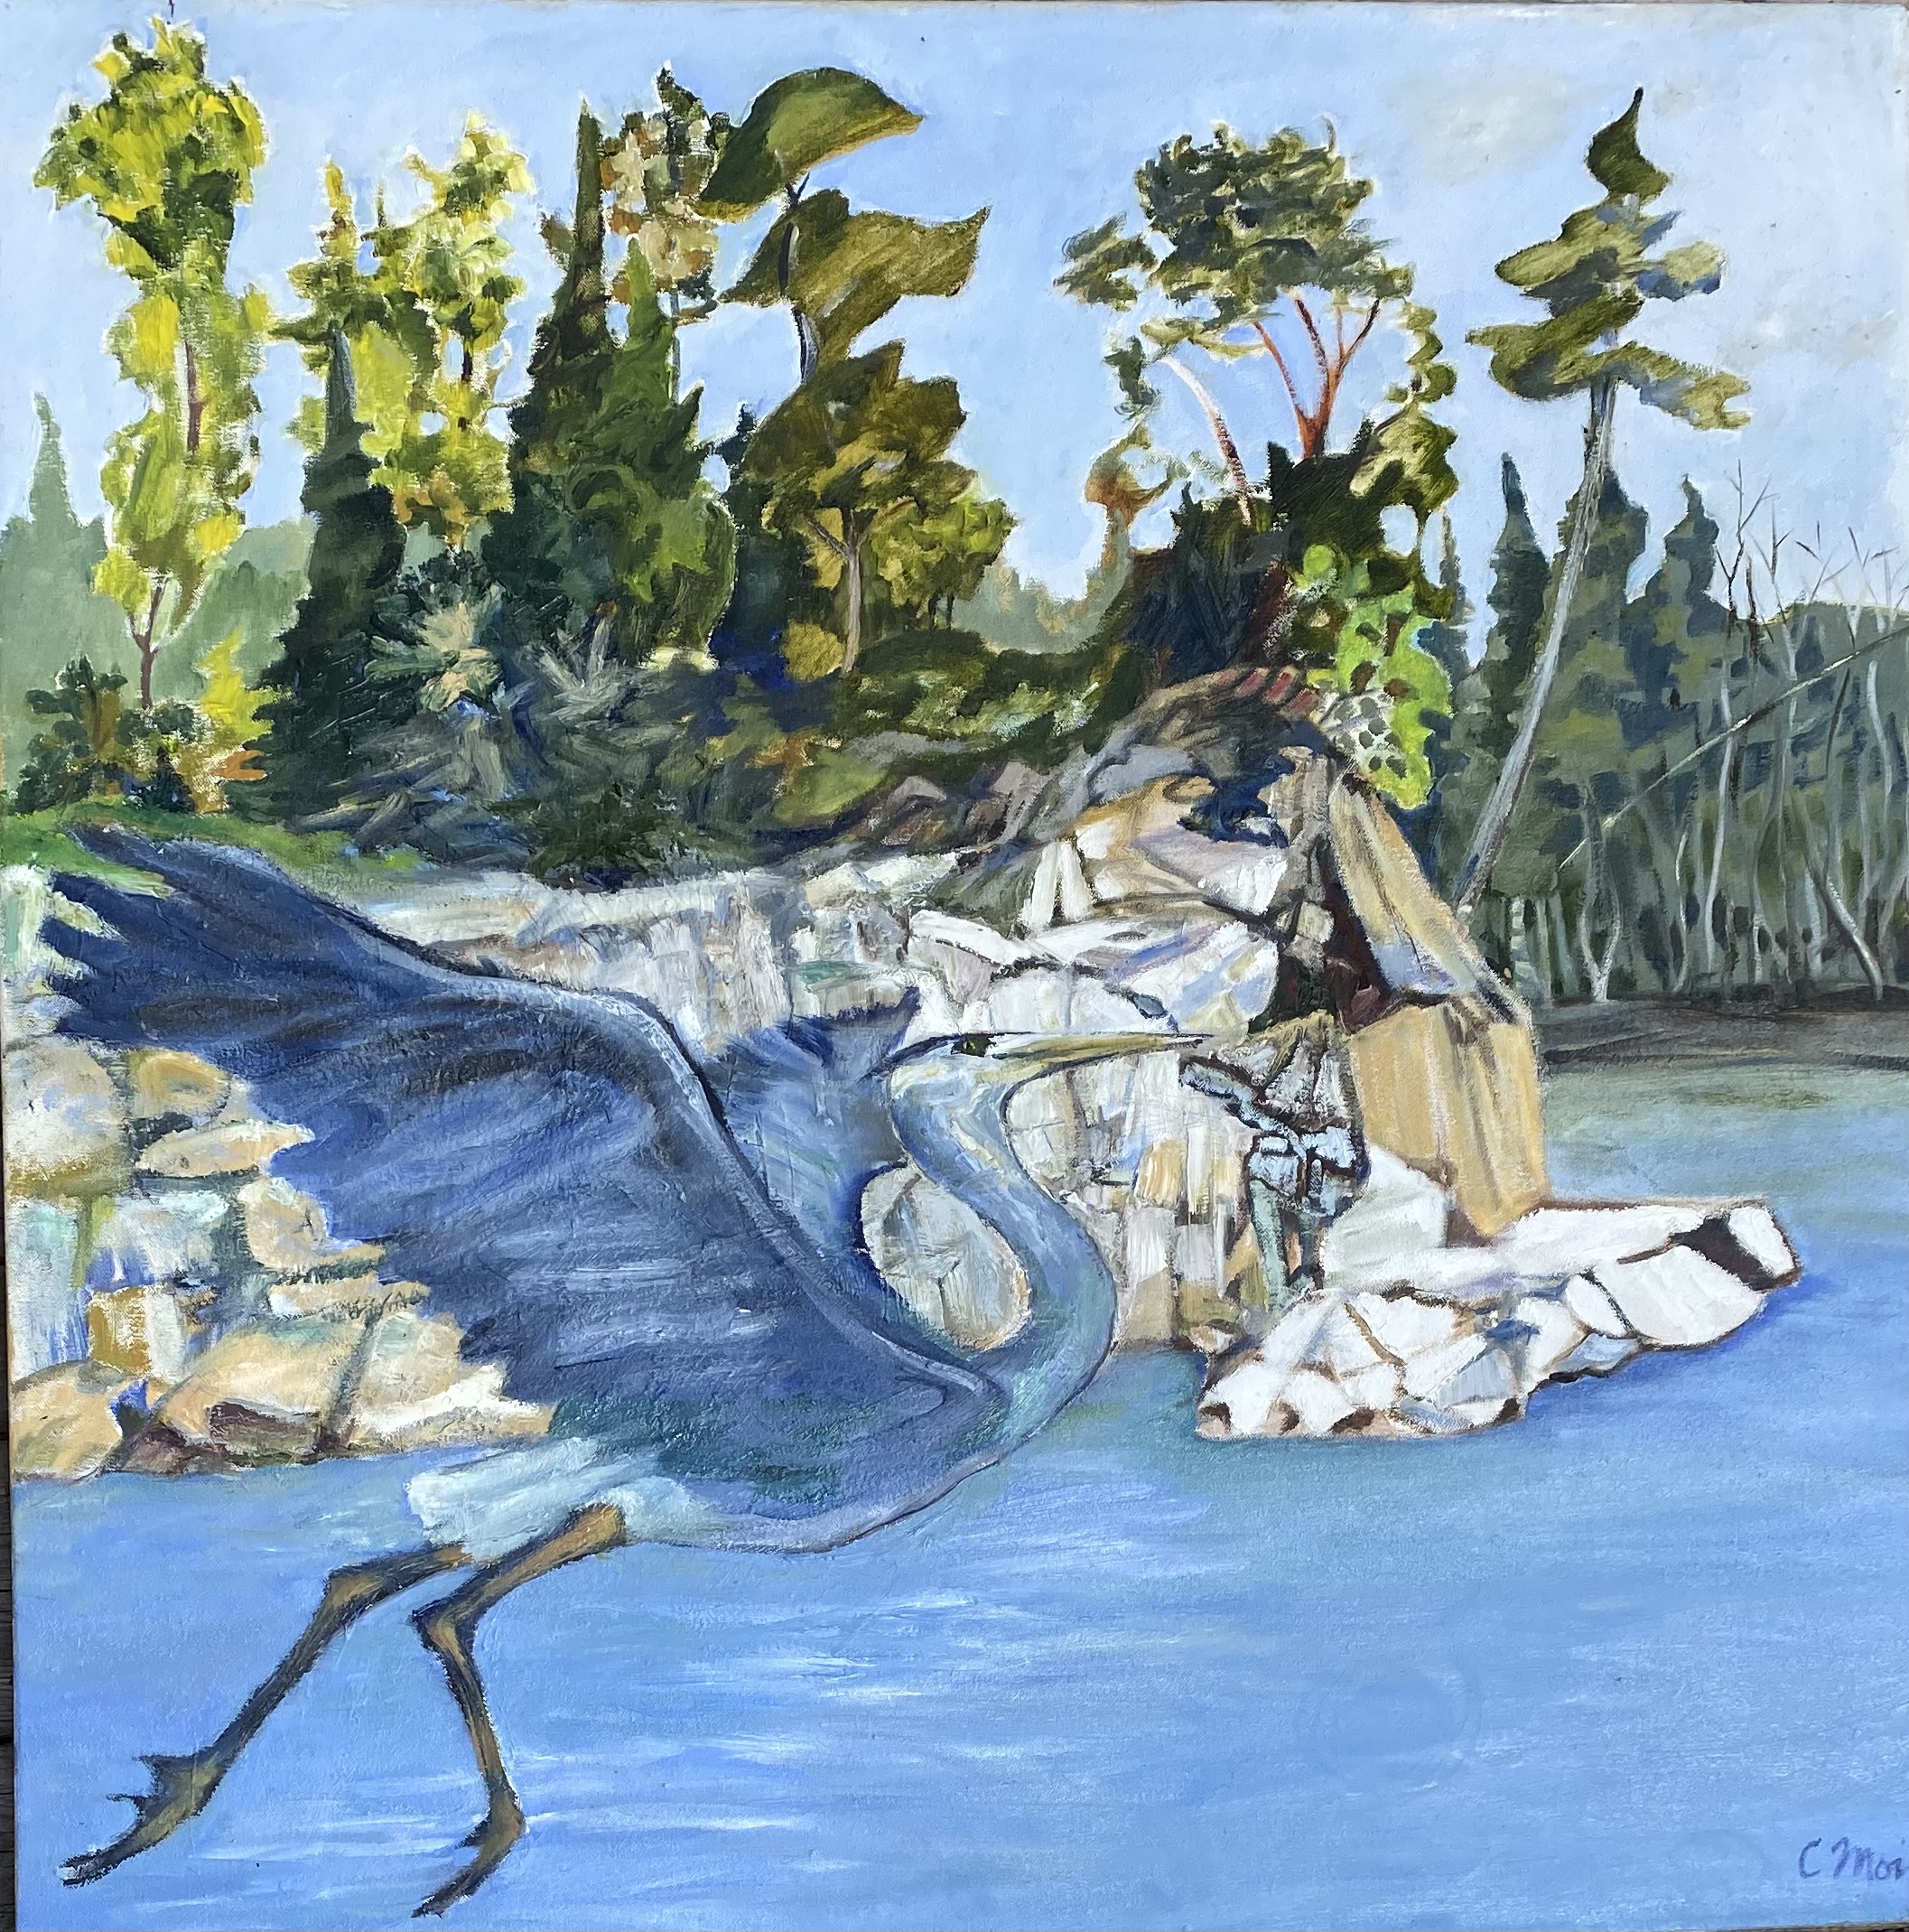 In some places she calls this painting Blue Heron on St Ann's Bay but she told us it was called Take Off.